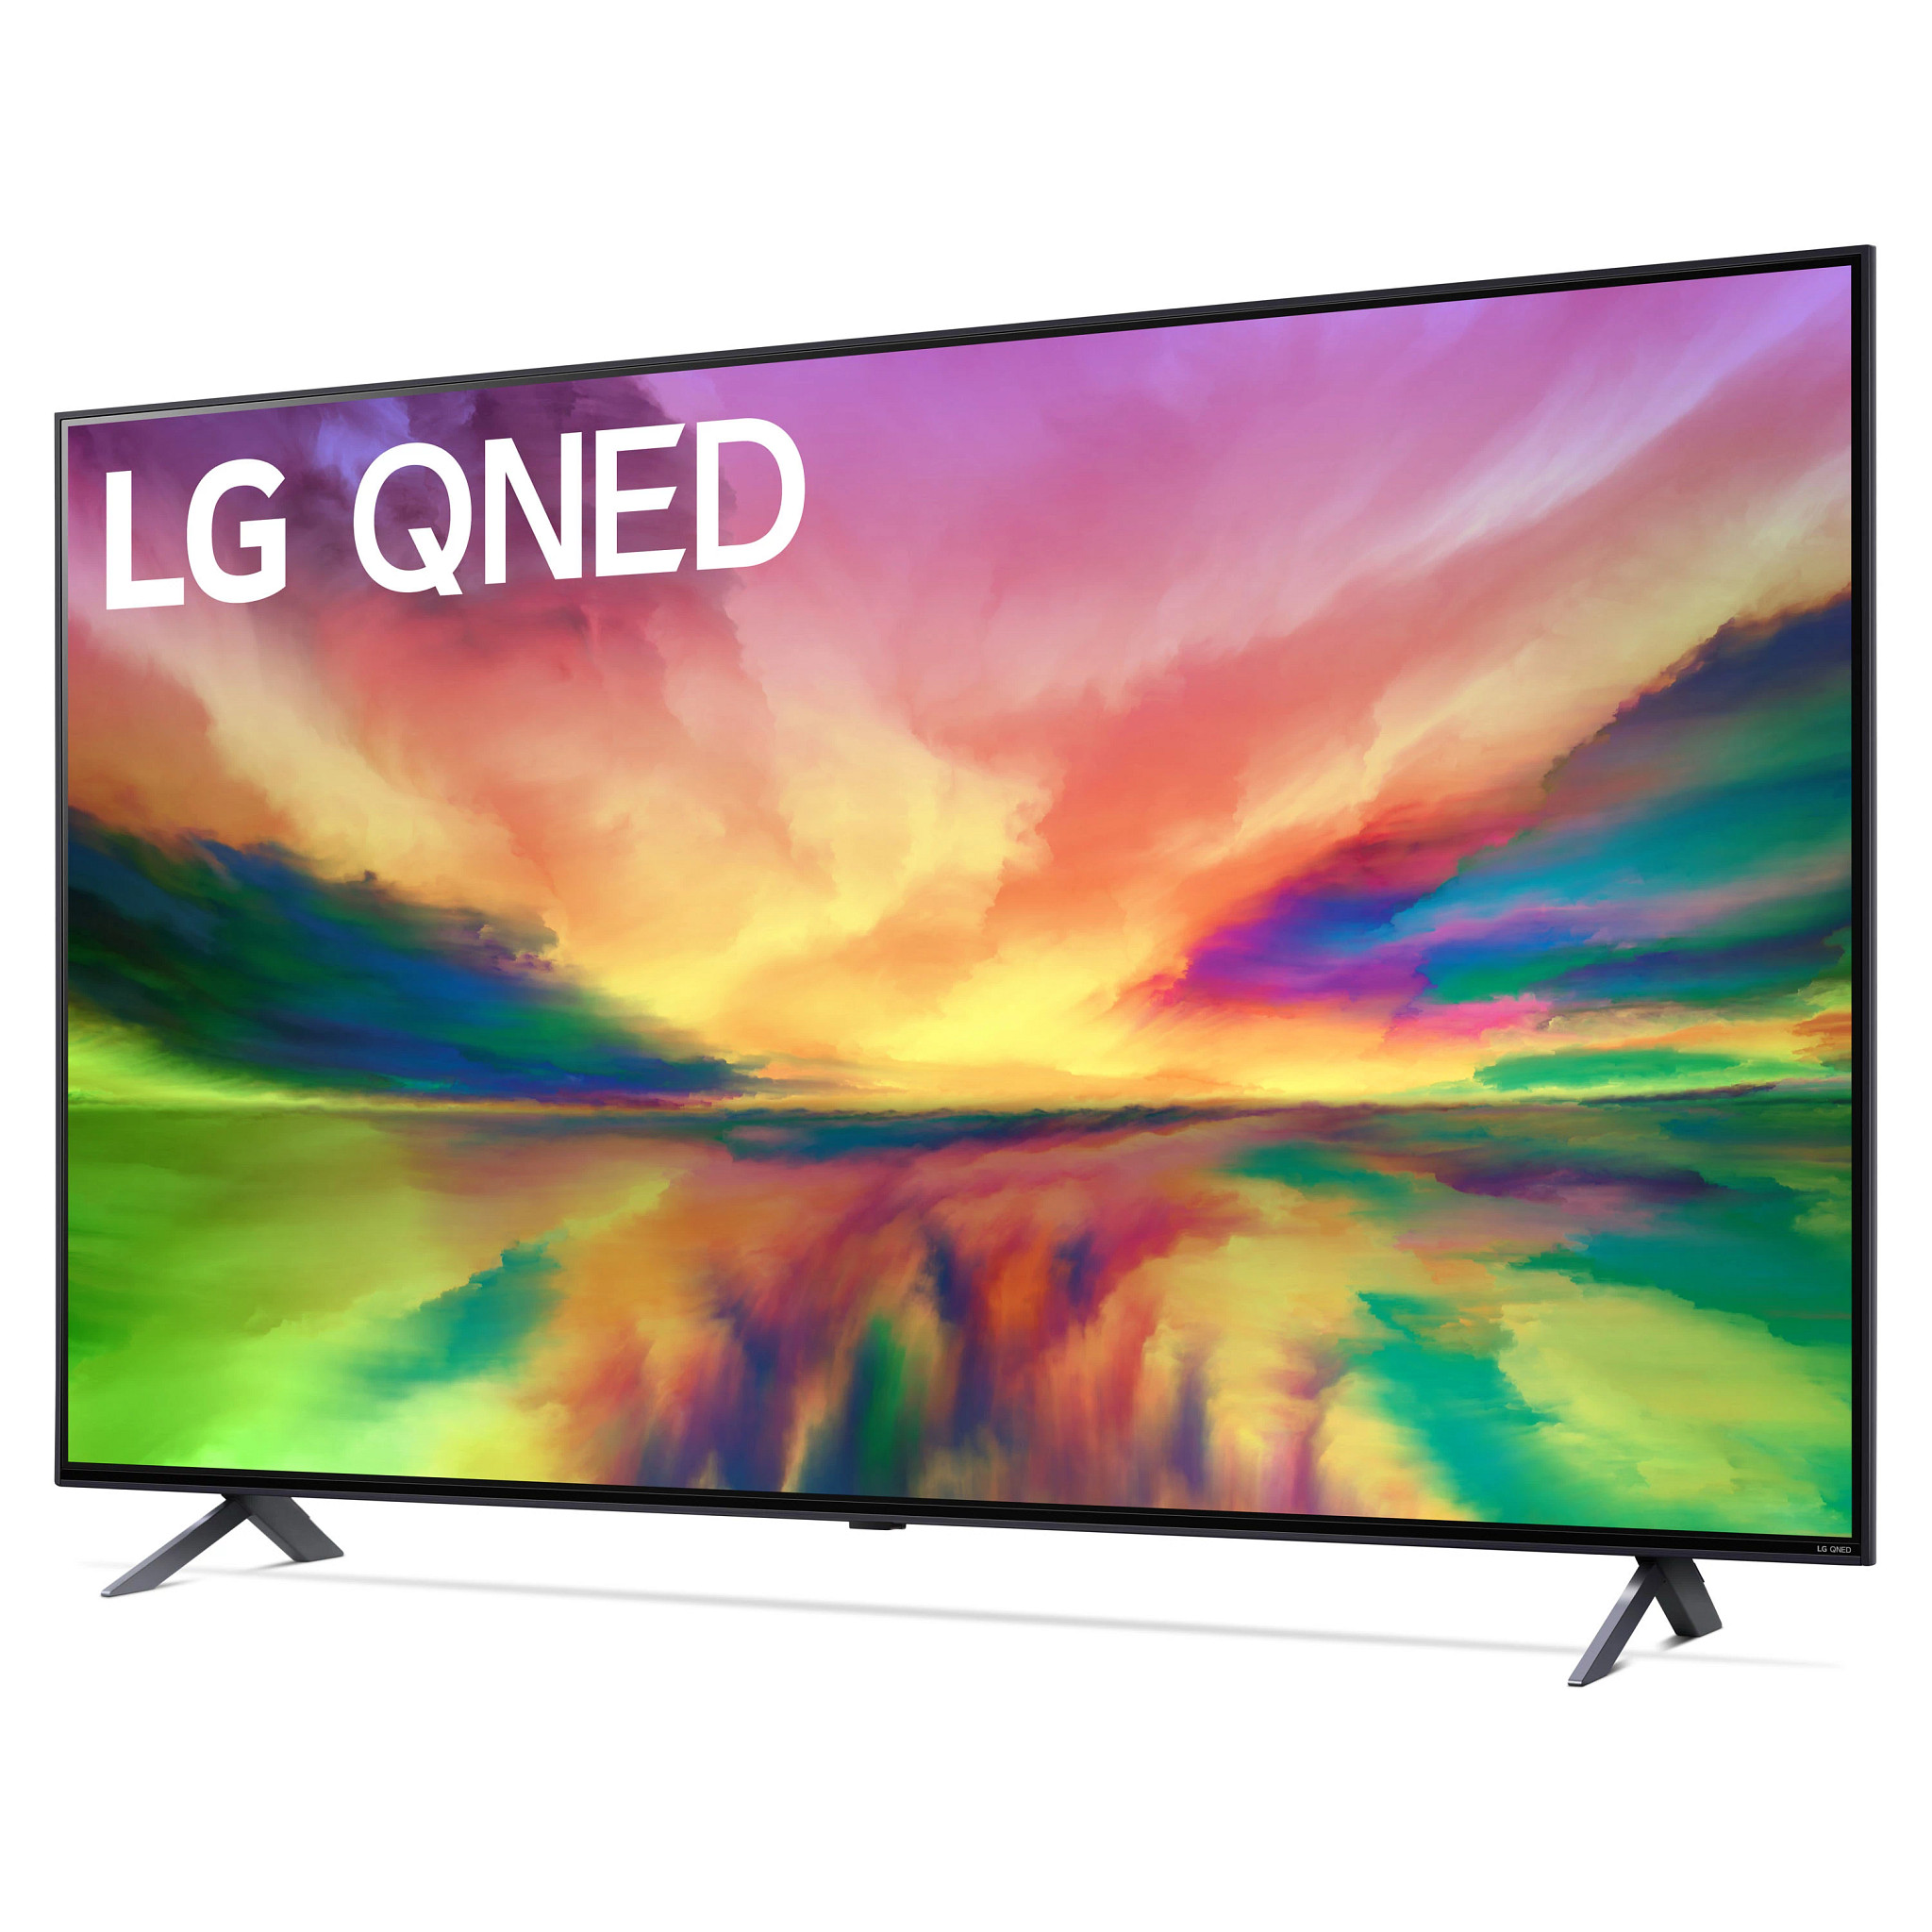 LG 75" Class QNED80 series LED 4K UHD QNED Smart webOS 23 w/ ThinQ AI TV - 75QNED80URA - image 5 of 21